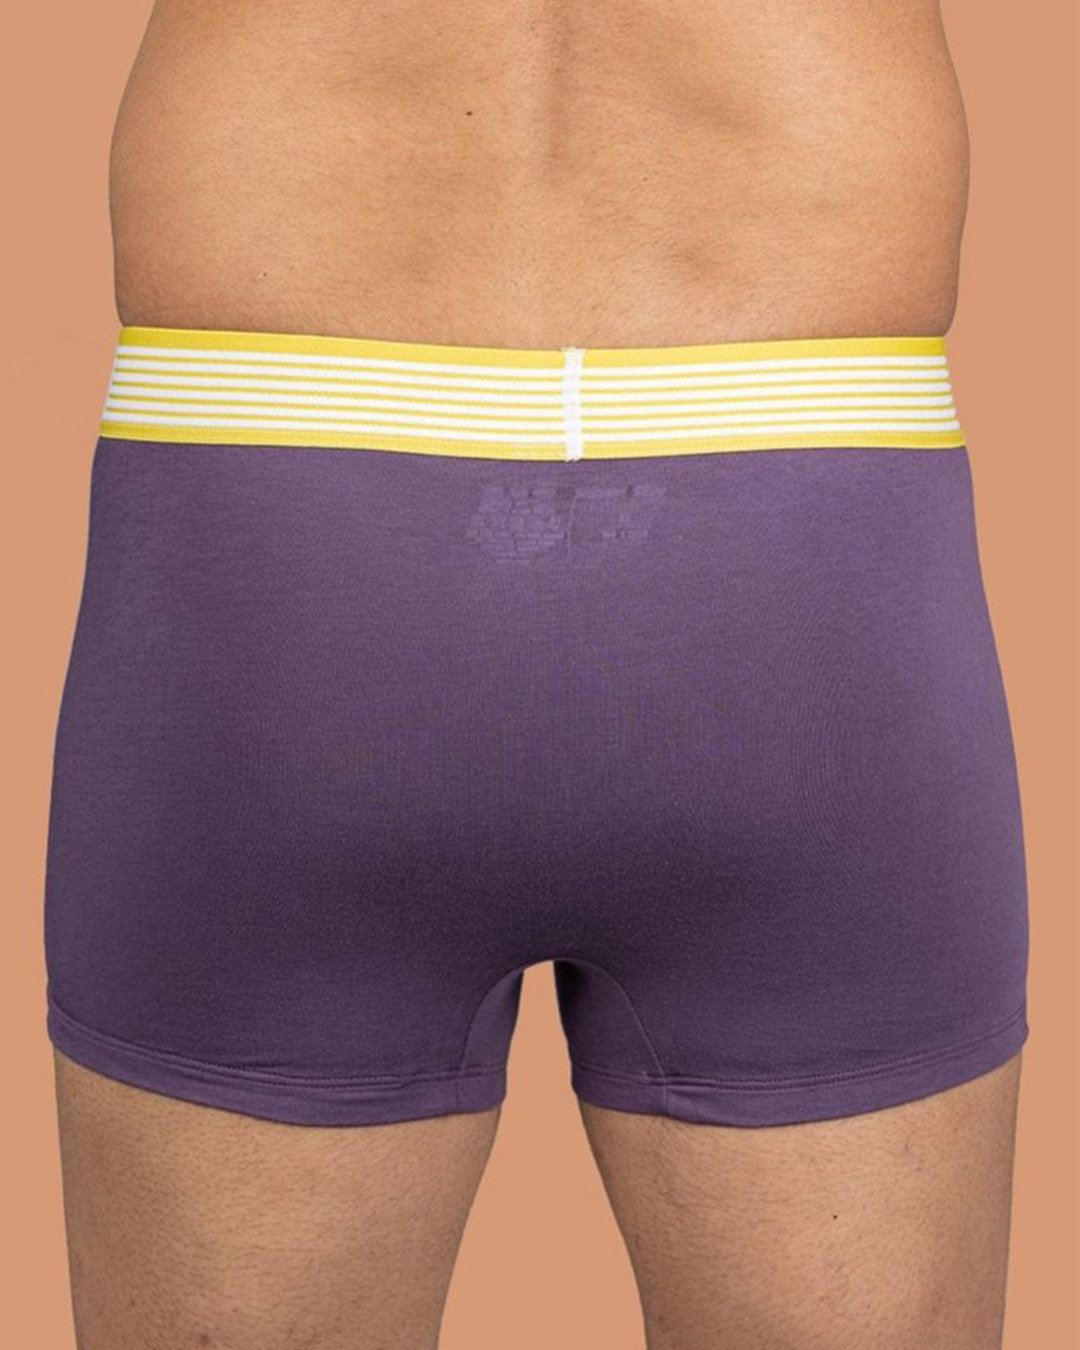 Shop Men's Aubergine Trunks with Yellow Band-Back